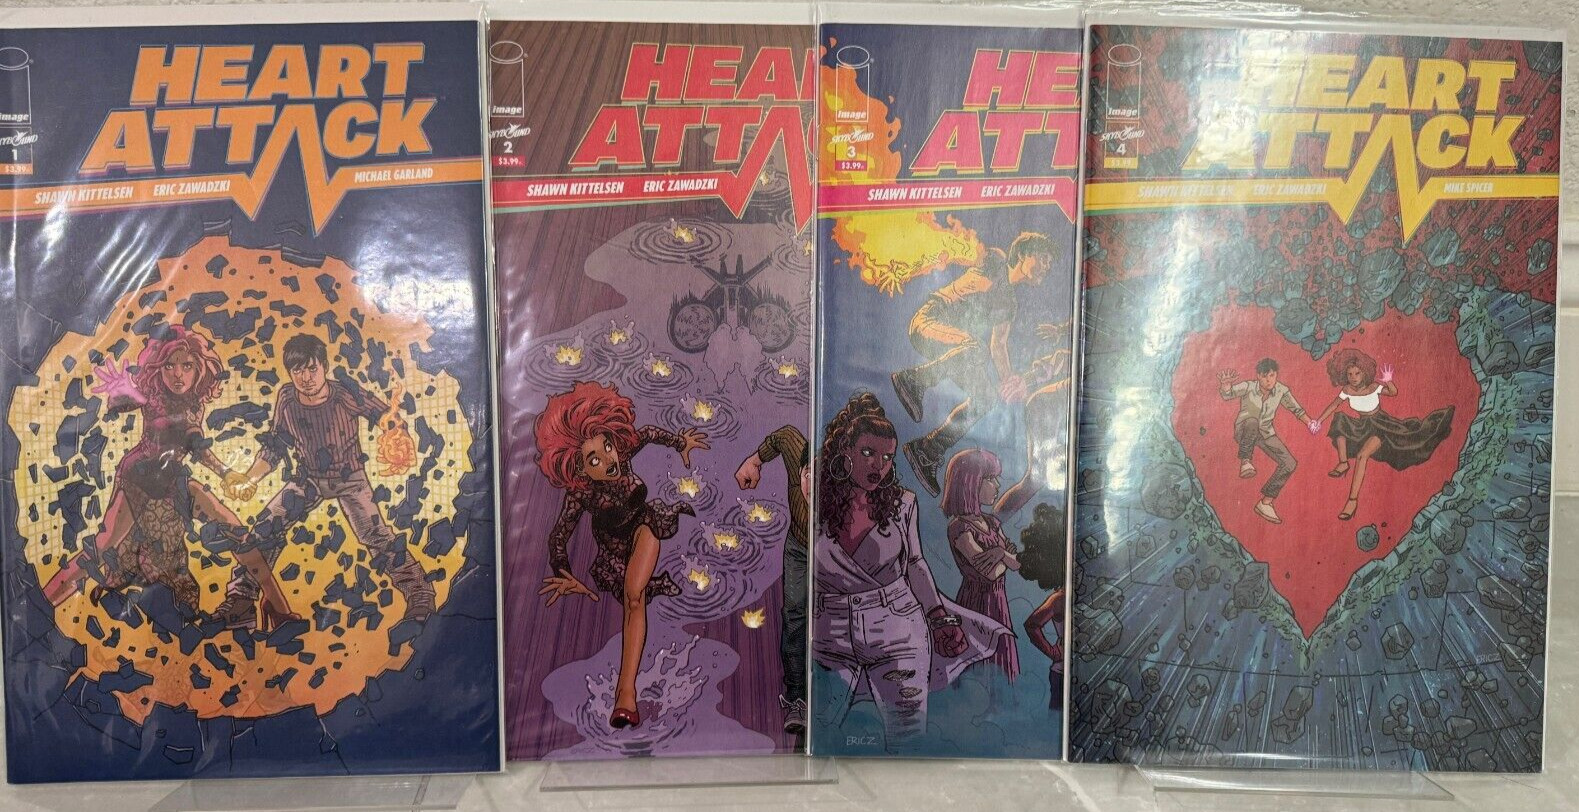 HEART ATTACK #1, 2, 3, 4 (Image 2019-20) NM optioned by Fuji